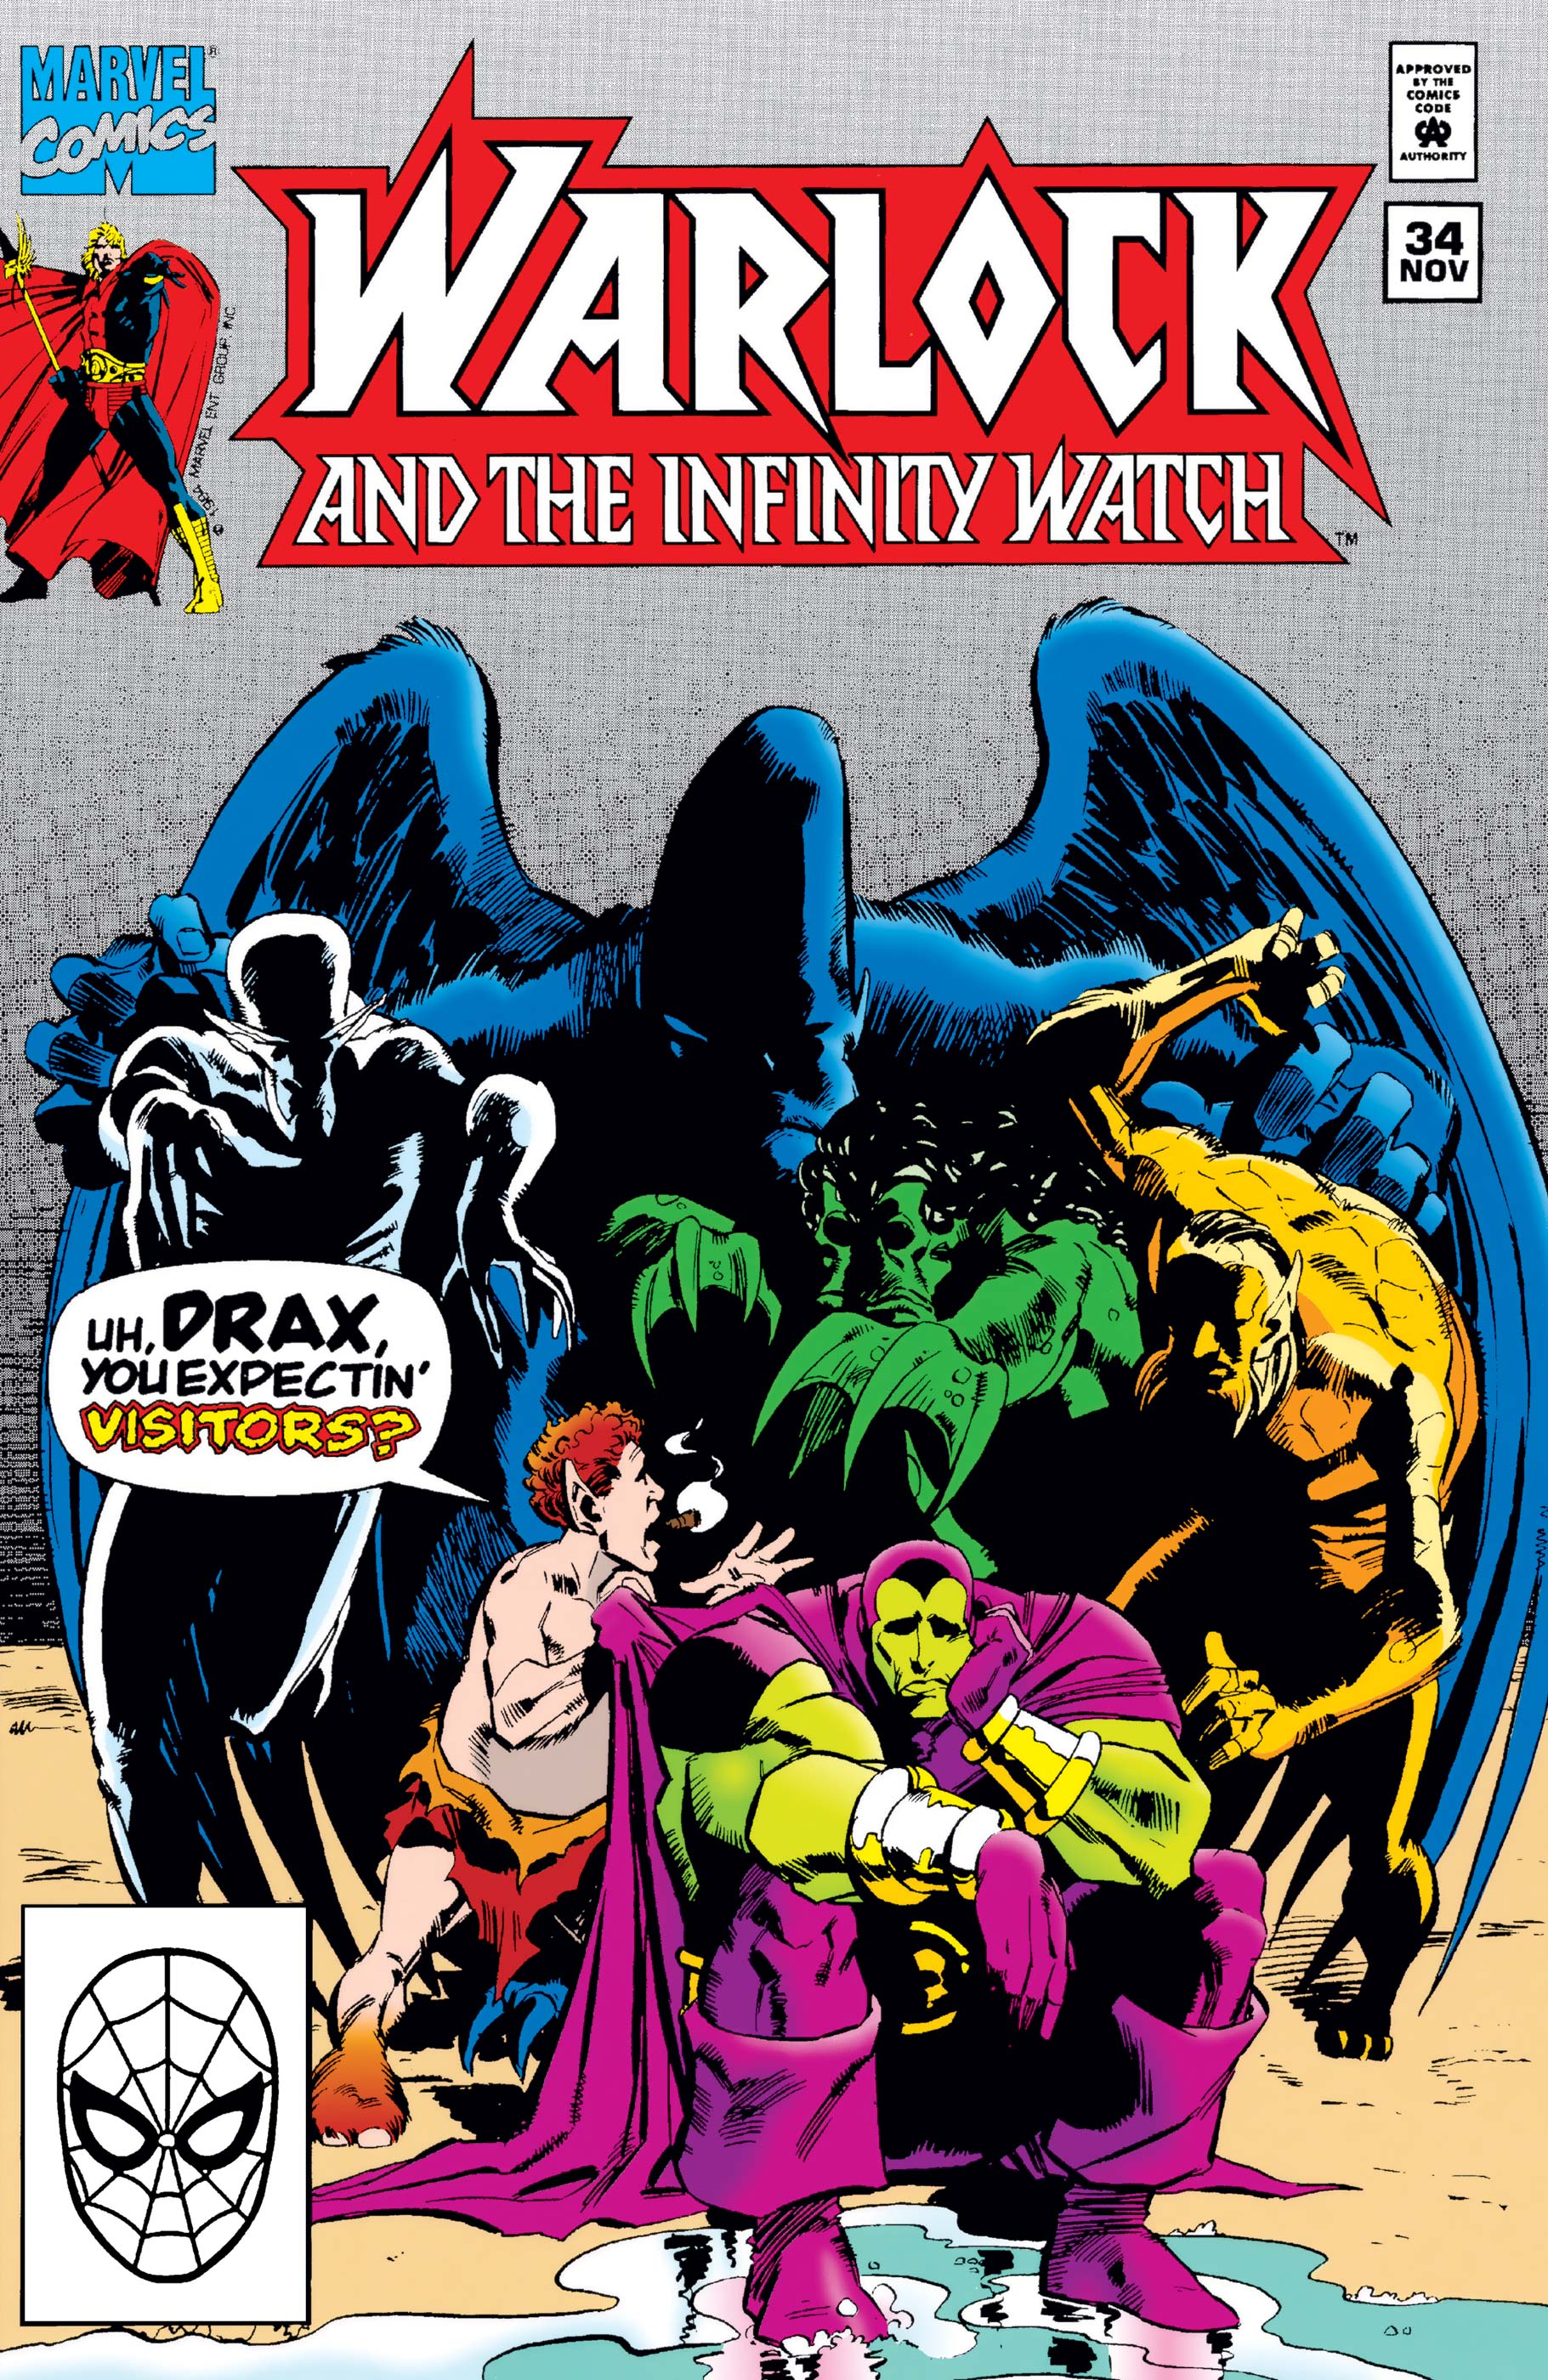 Warlock and the Infinity Watch (1992) #34